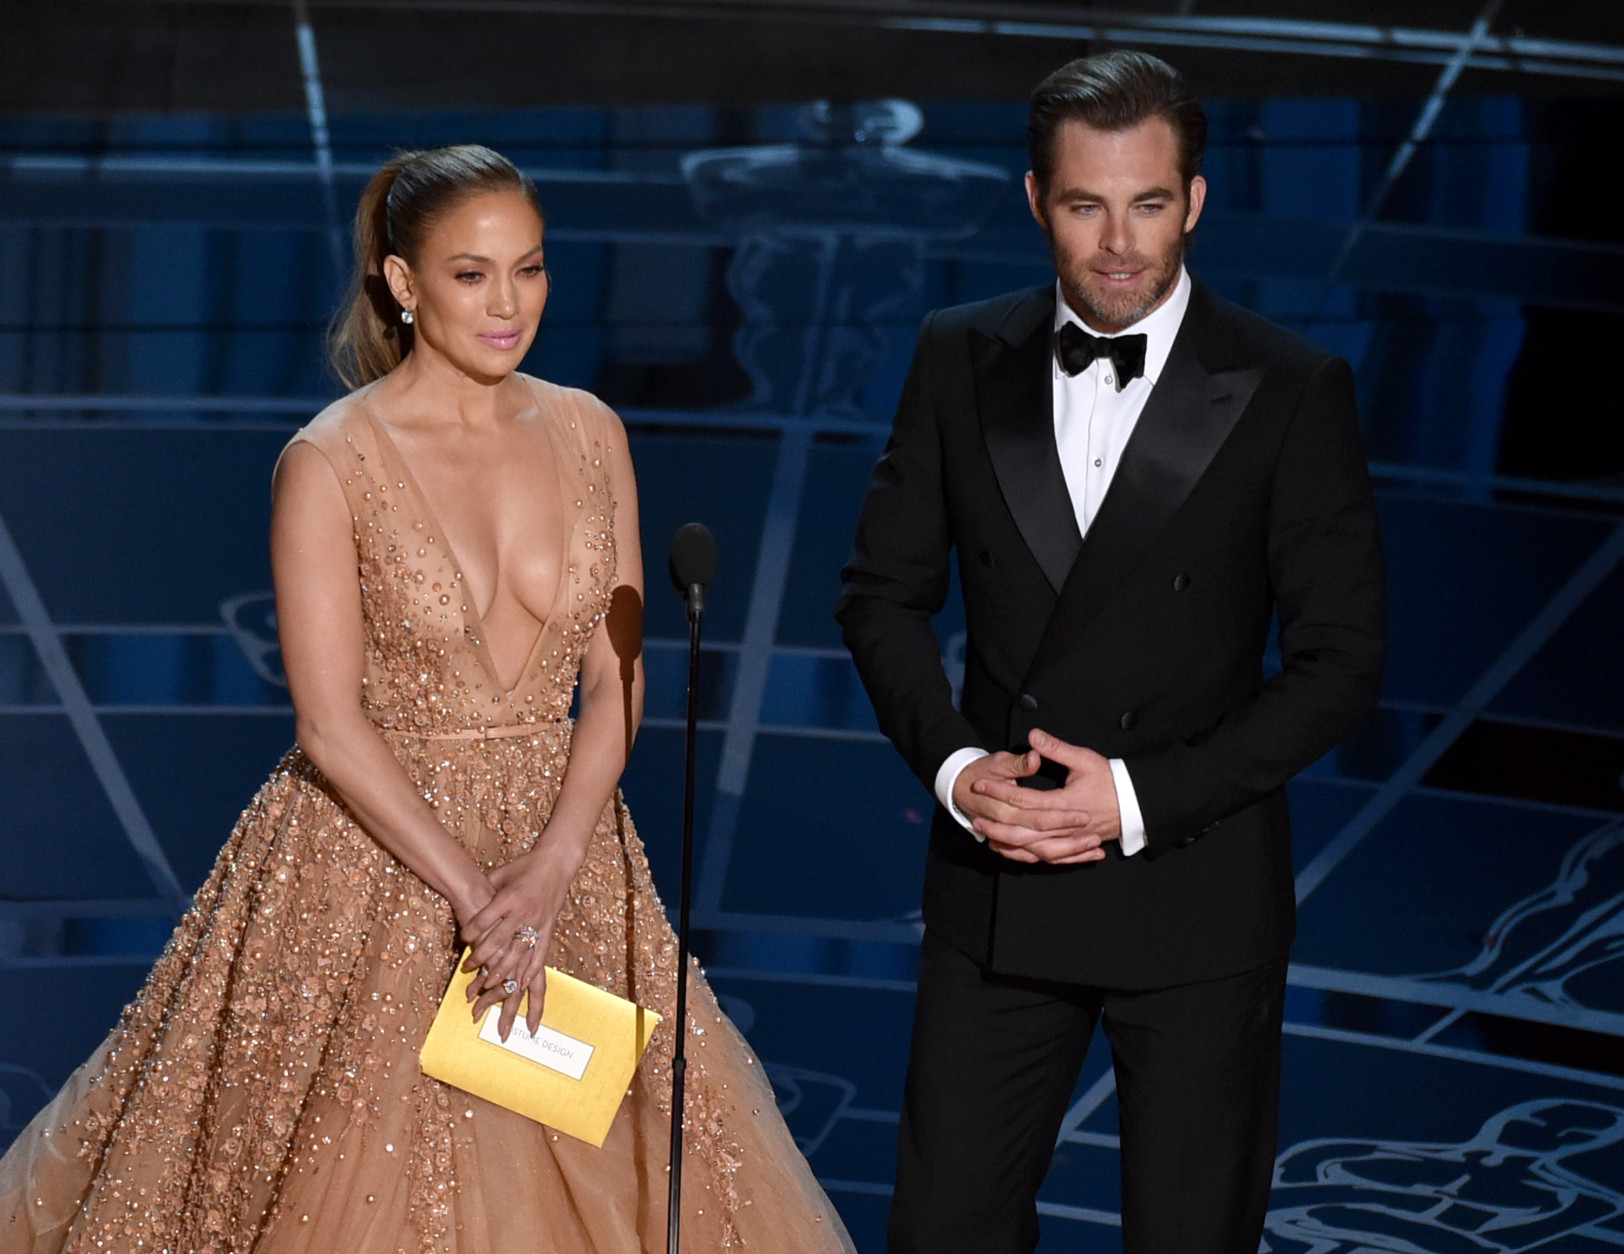 Jennifer Lopez, left, and Chris Pine present the award for best costume design at the Oscars on Sunday, Feb. 22, 2015, at the Dolby Theatre in Los Angeles. (Photo by John Shearer/Invision/AP)